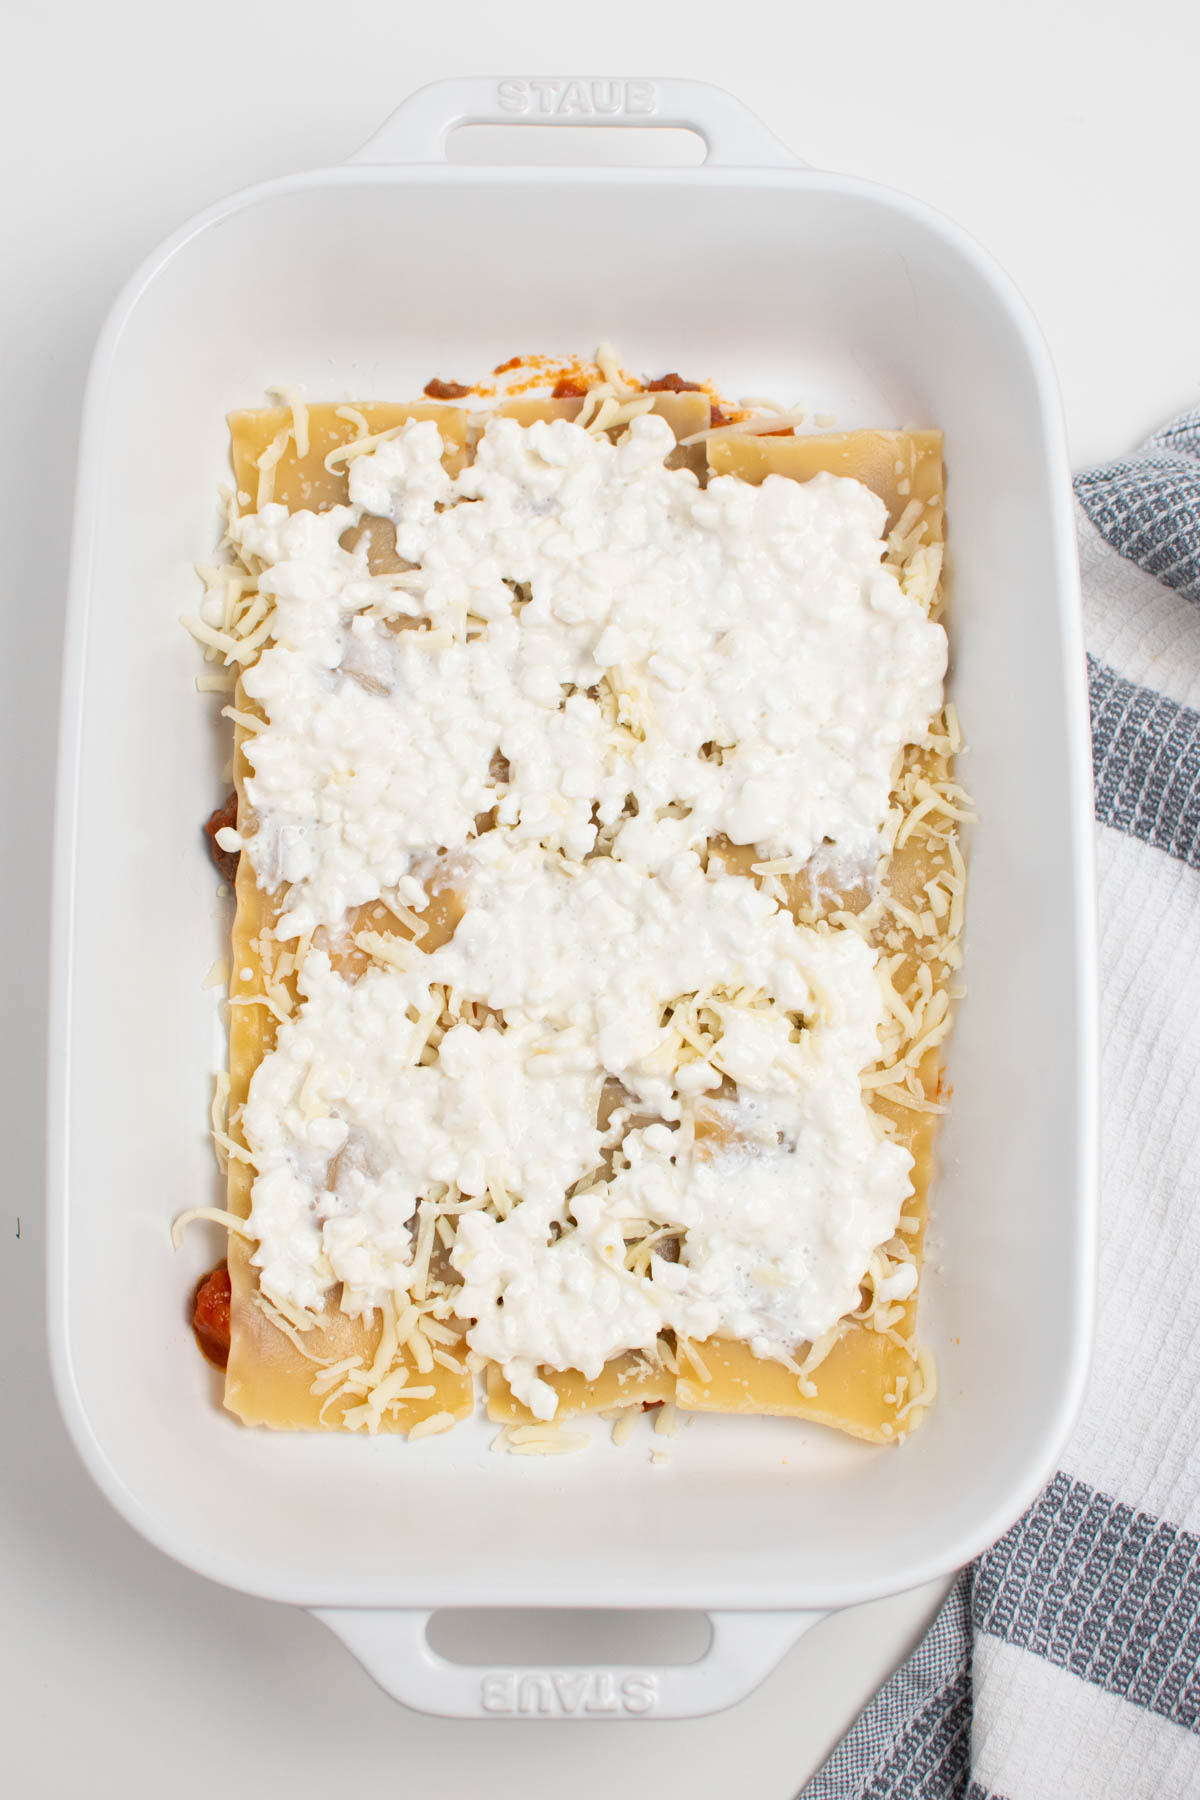 Spoonfuls of cottage cheese and shredded mozzarella on lasagna noodles in baking dish.